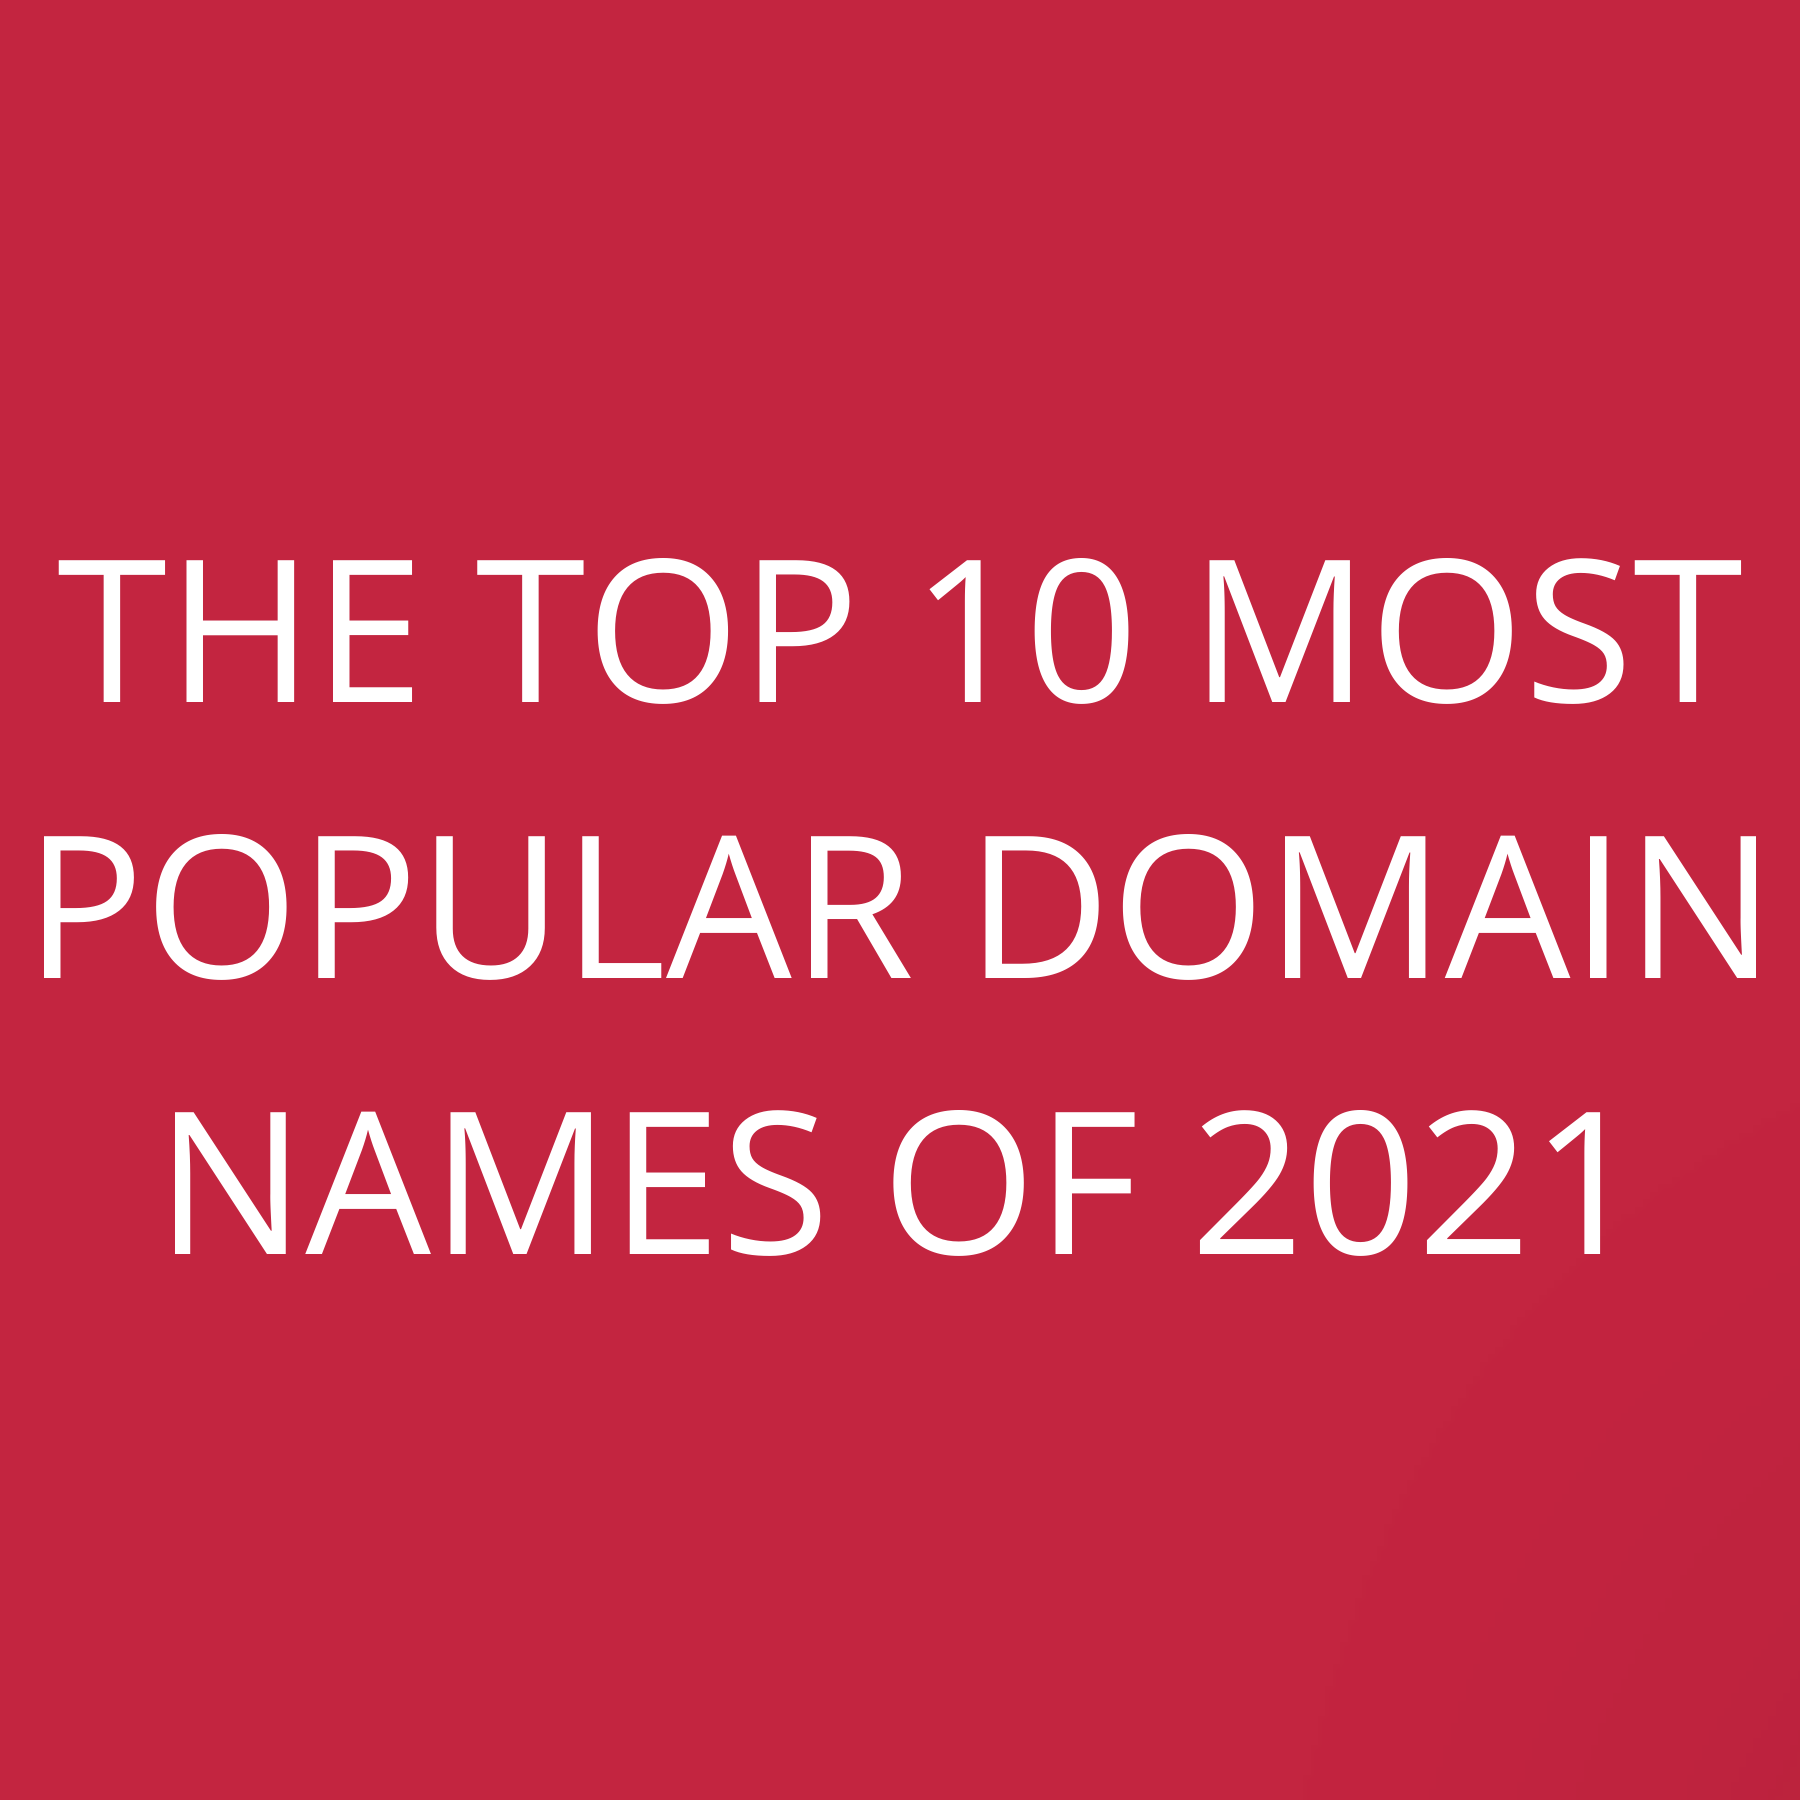 The Top 10 most popular domain names of 2021